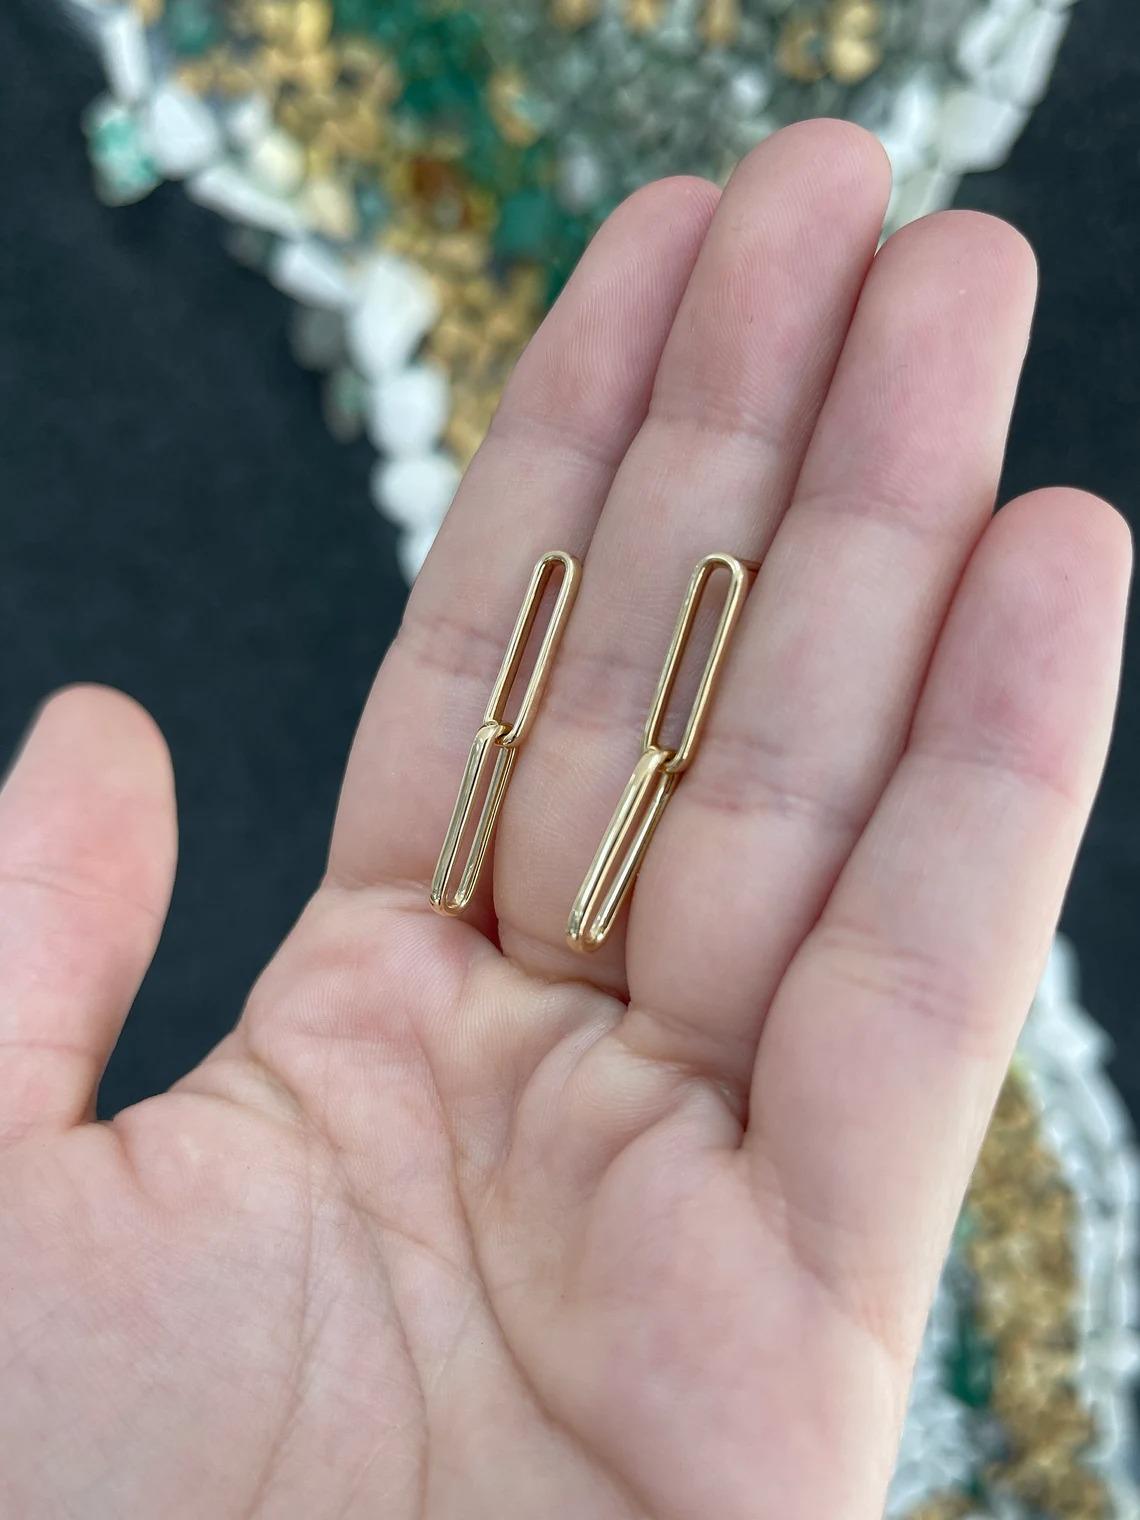 These captivating women's paperclip dangle earrings showcase a unique design with two interconnected paperclips gracefully dangling from each other. Meticulously crafted in 14k yellow gold, these earrings offer a modern and stylish twist to a